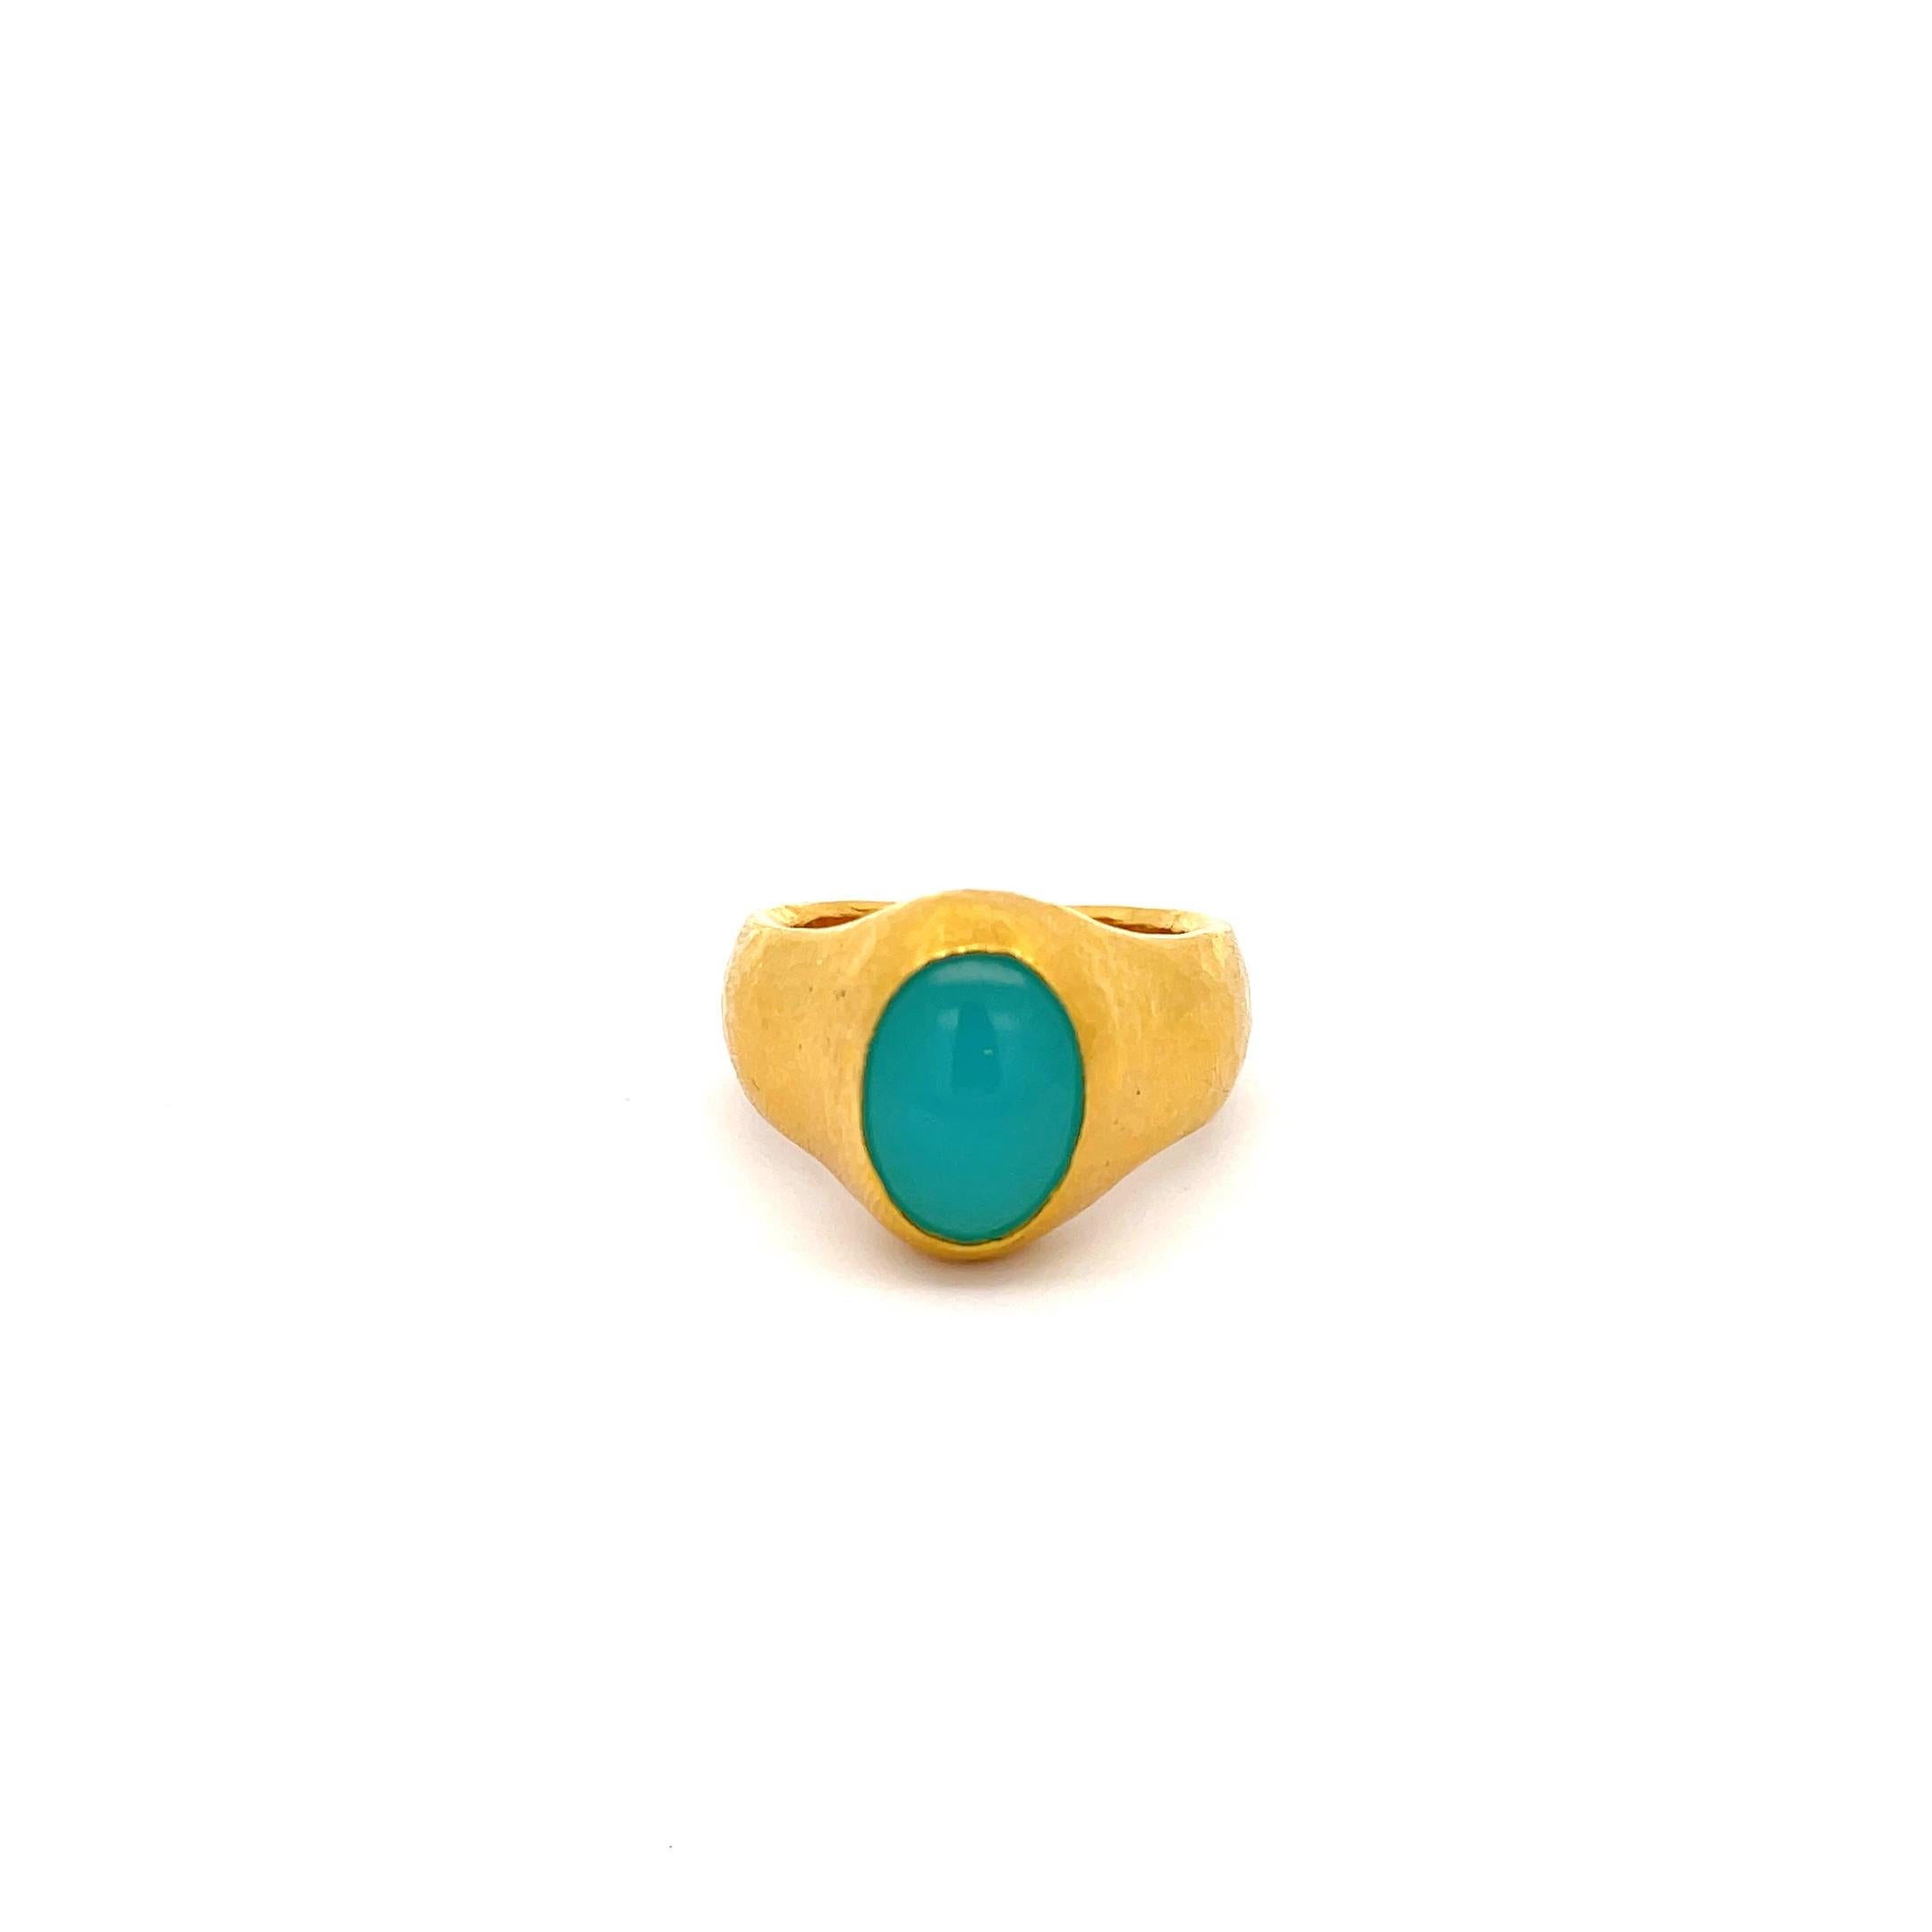 Gurhan Rune Collection Opal Ring in 24K Gold. The ring features a cabochon opal that measures approximately 13.80mm x 10.10mm. Ring size 9.75, weighs 16.50 grams.